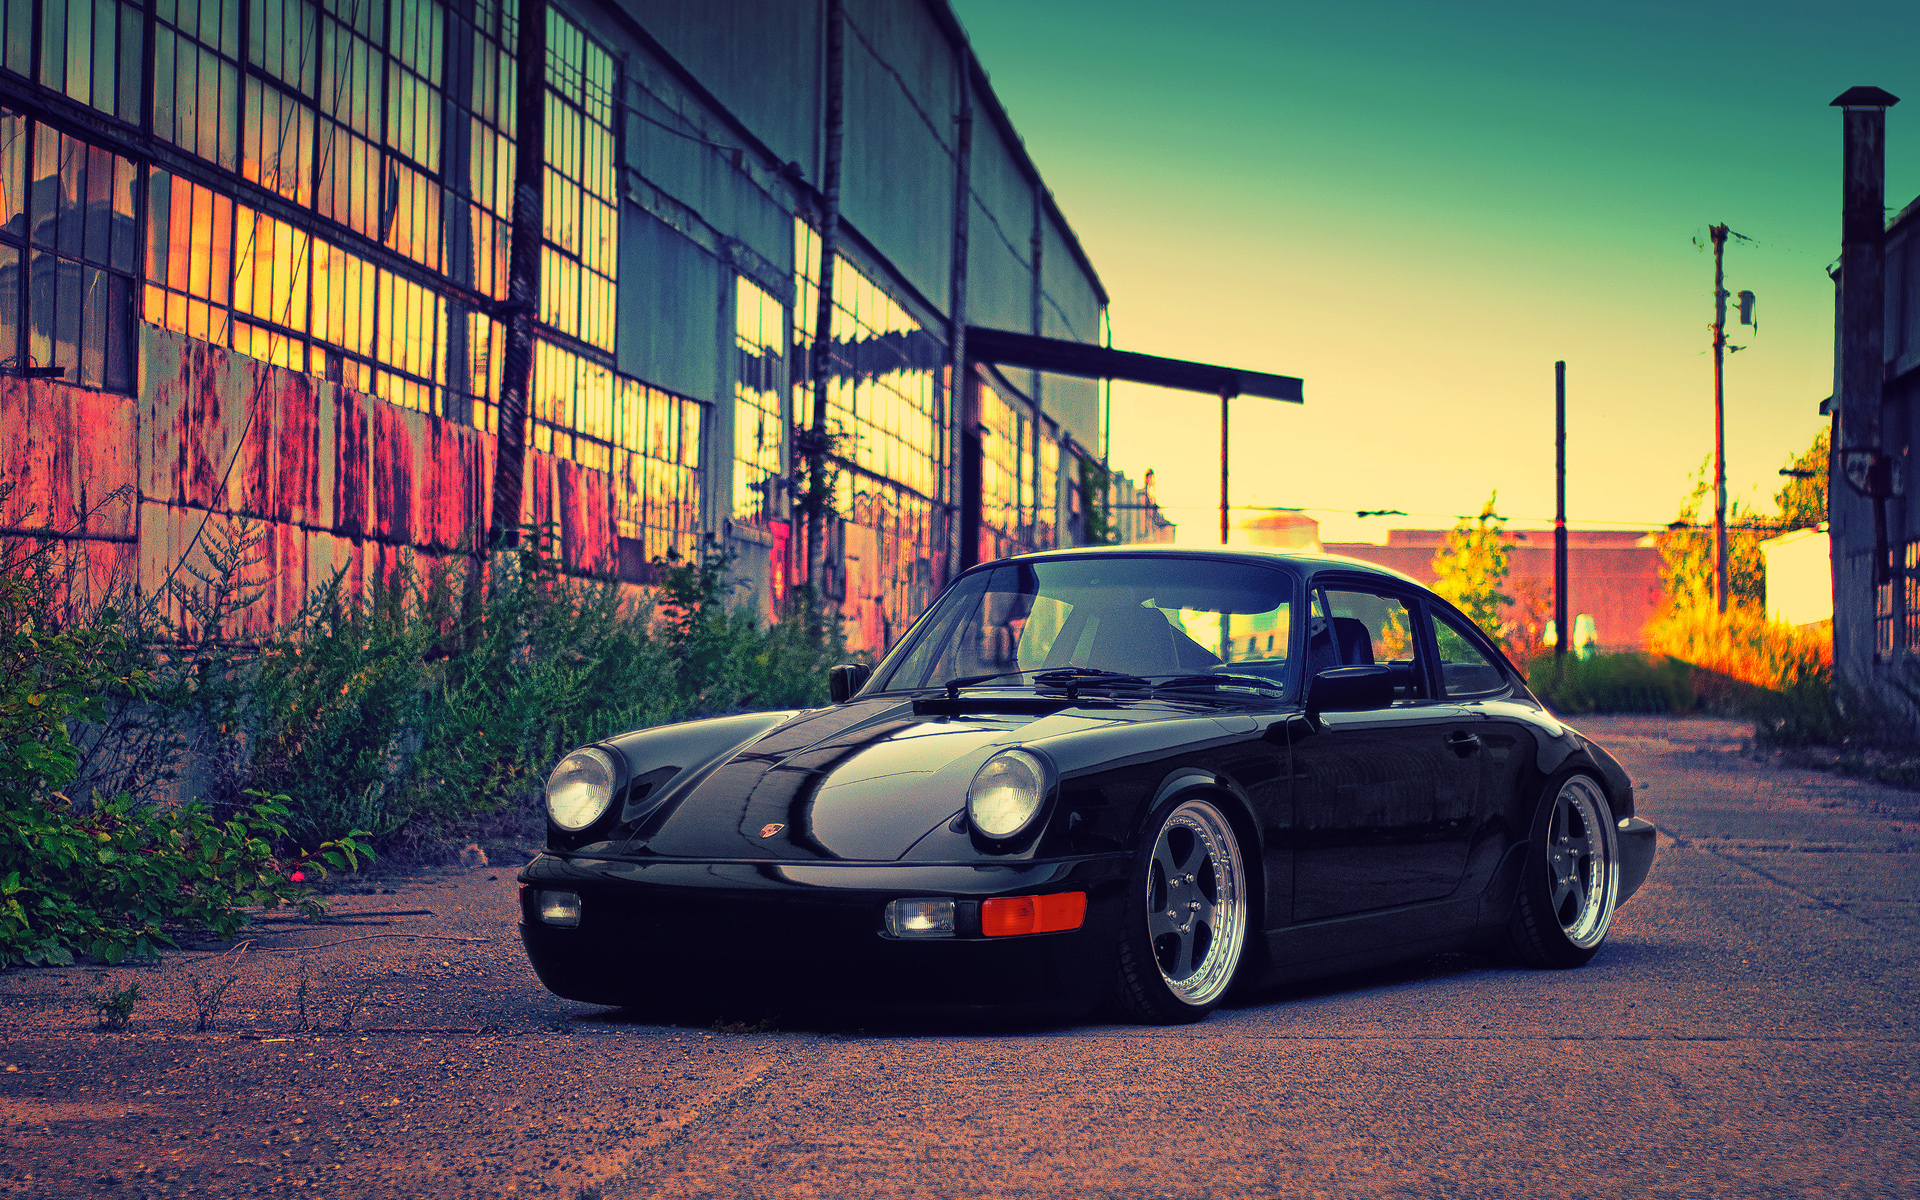 1920x1200 10+ Porsche 993 HD Wallpapers and Backgrounds